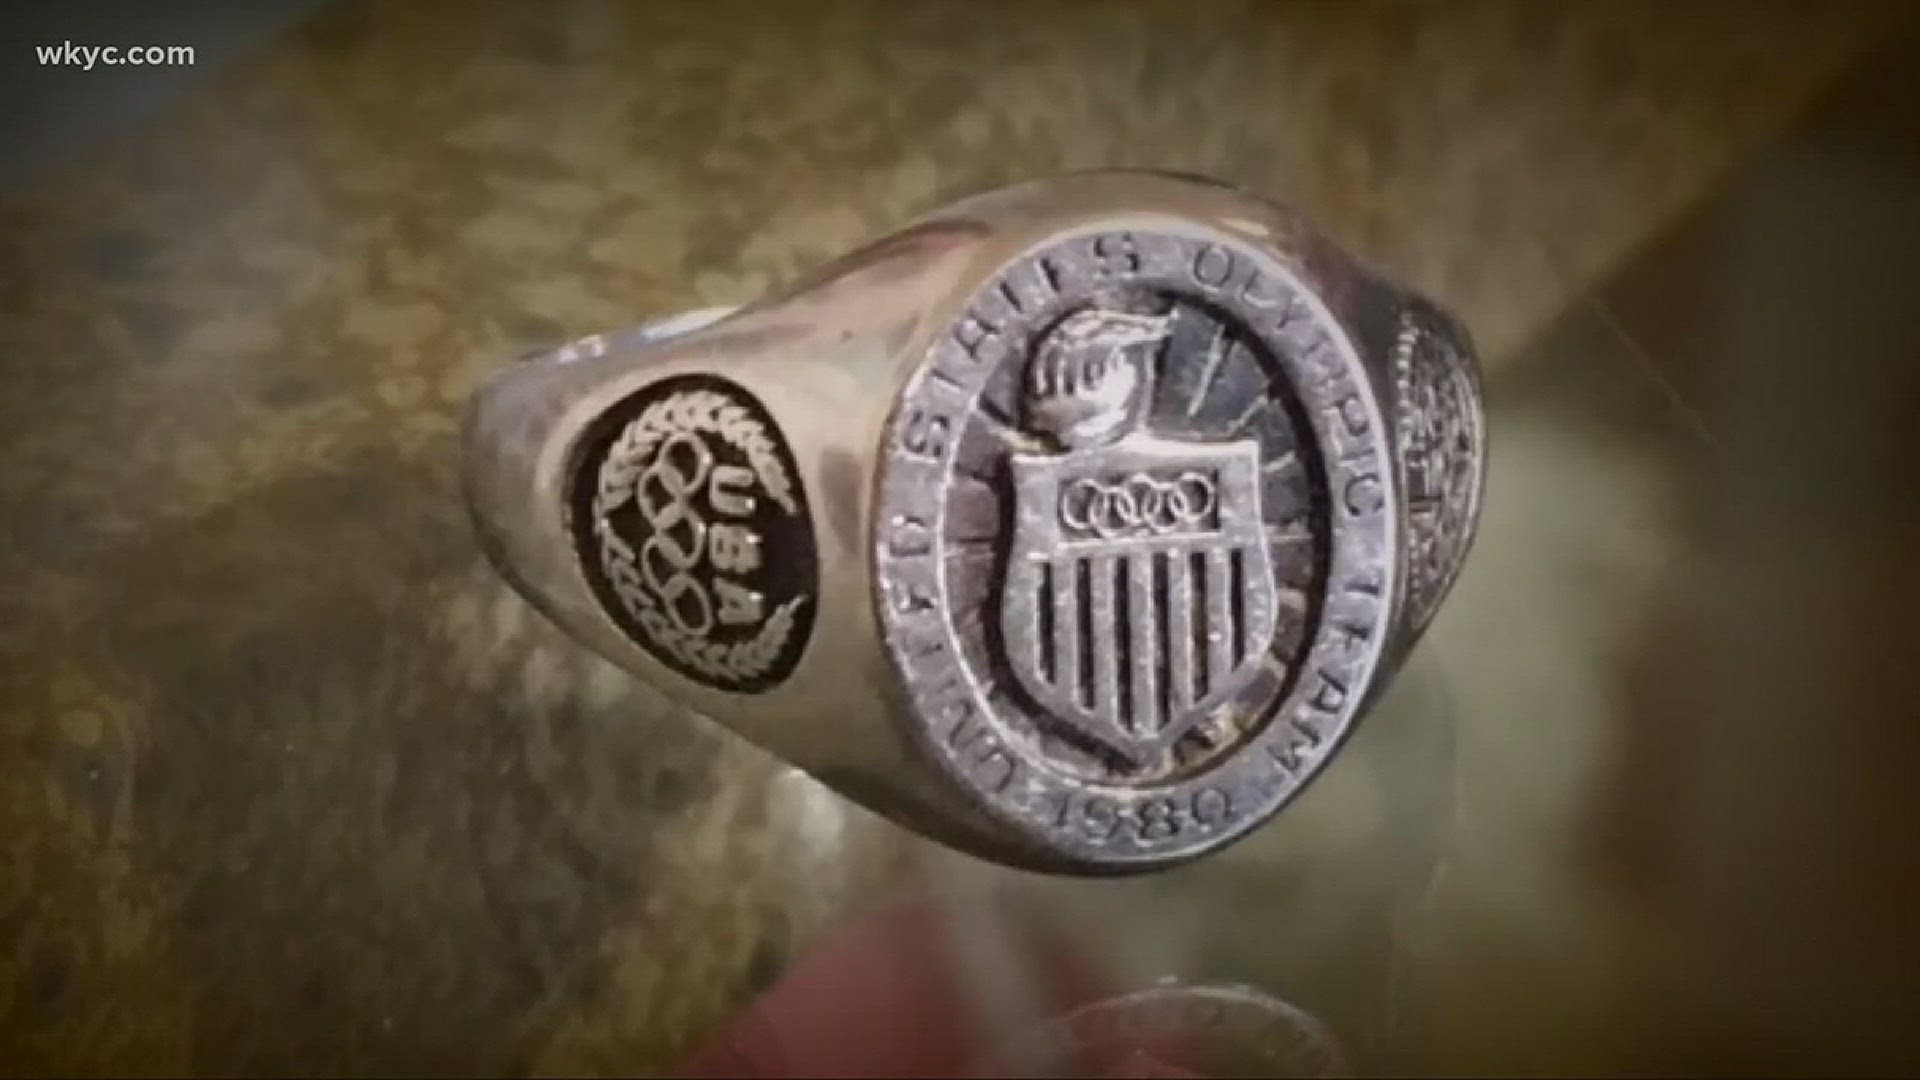 UPDATE: Olympic ring found by Canton woman, possibly linked to former Olympic athlete